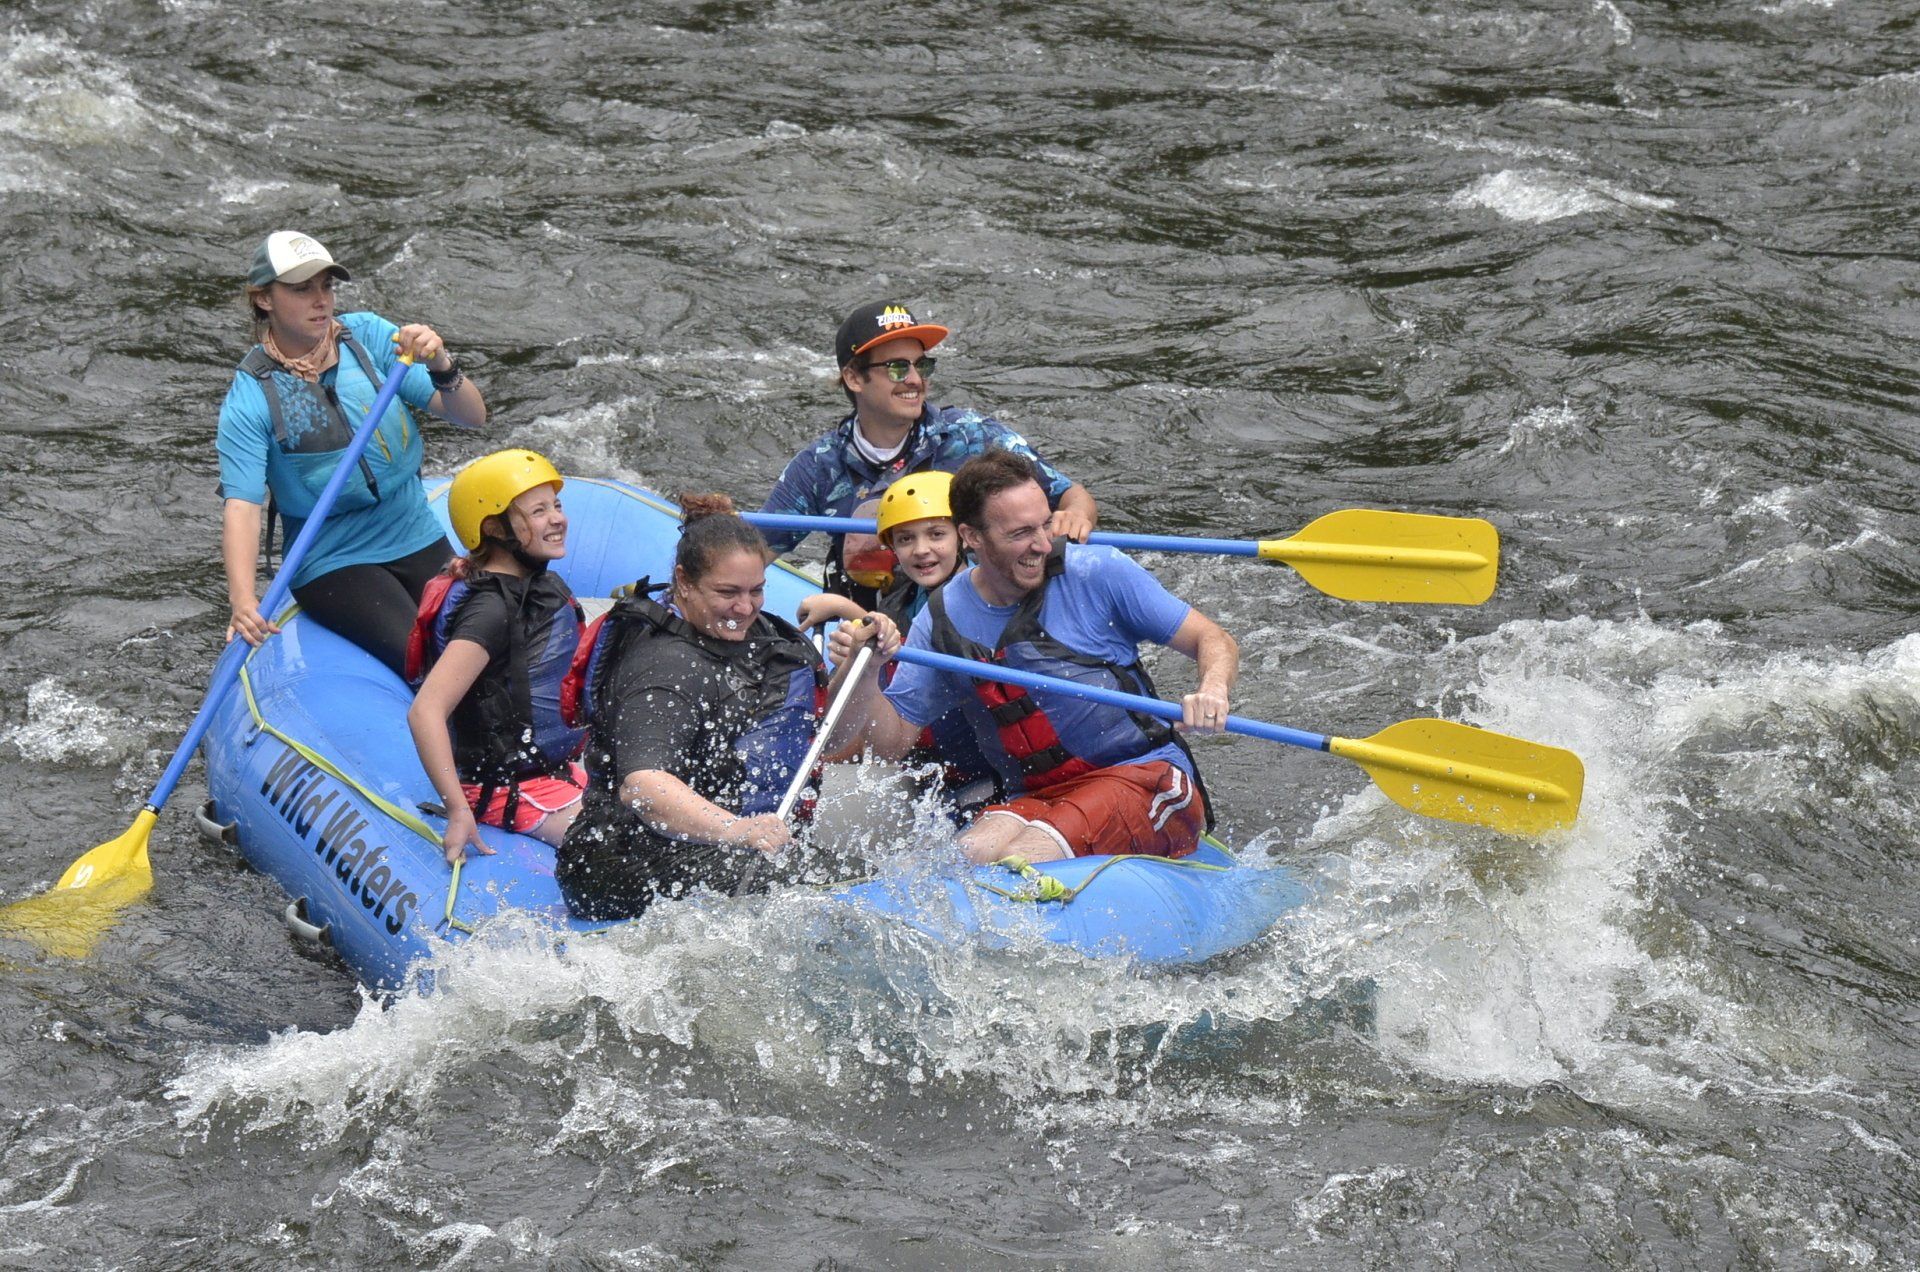 Awesome Rafting, Whitewater at its Finest!